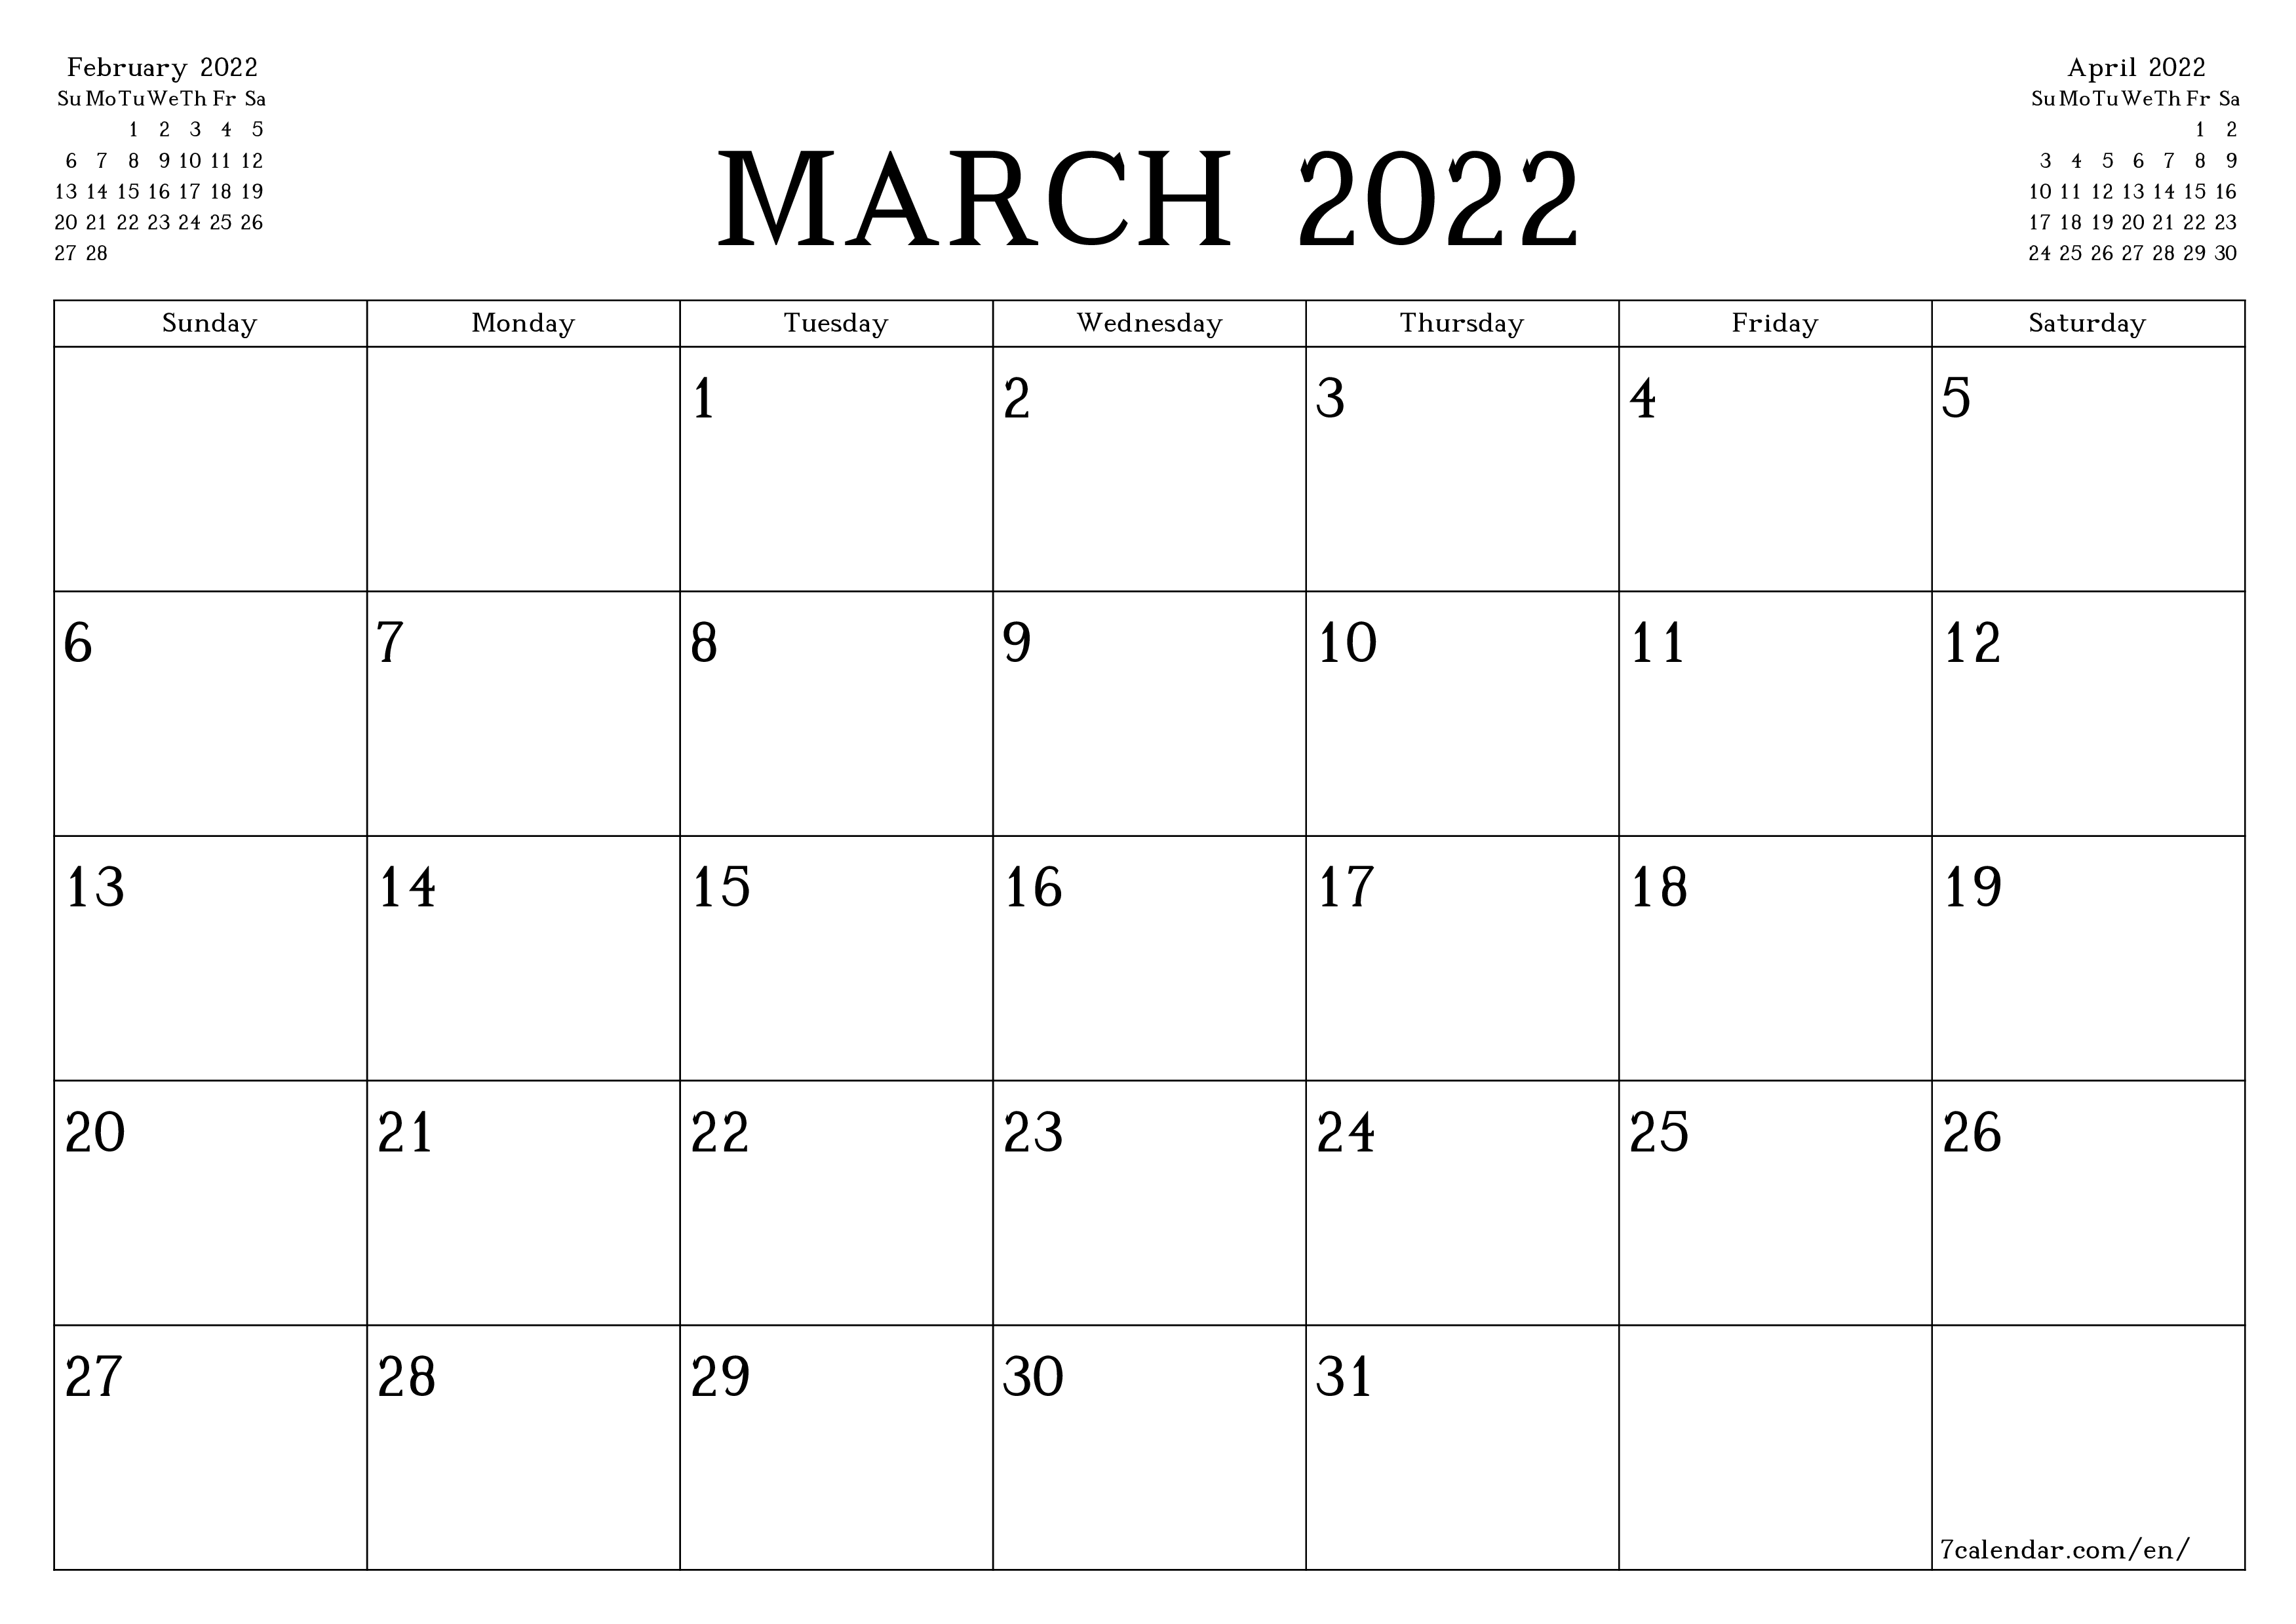 March 2022 Monthly Calendar March 2022 Free Printable Calendars And Planners, Pdf Templates - 7Calendar